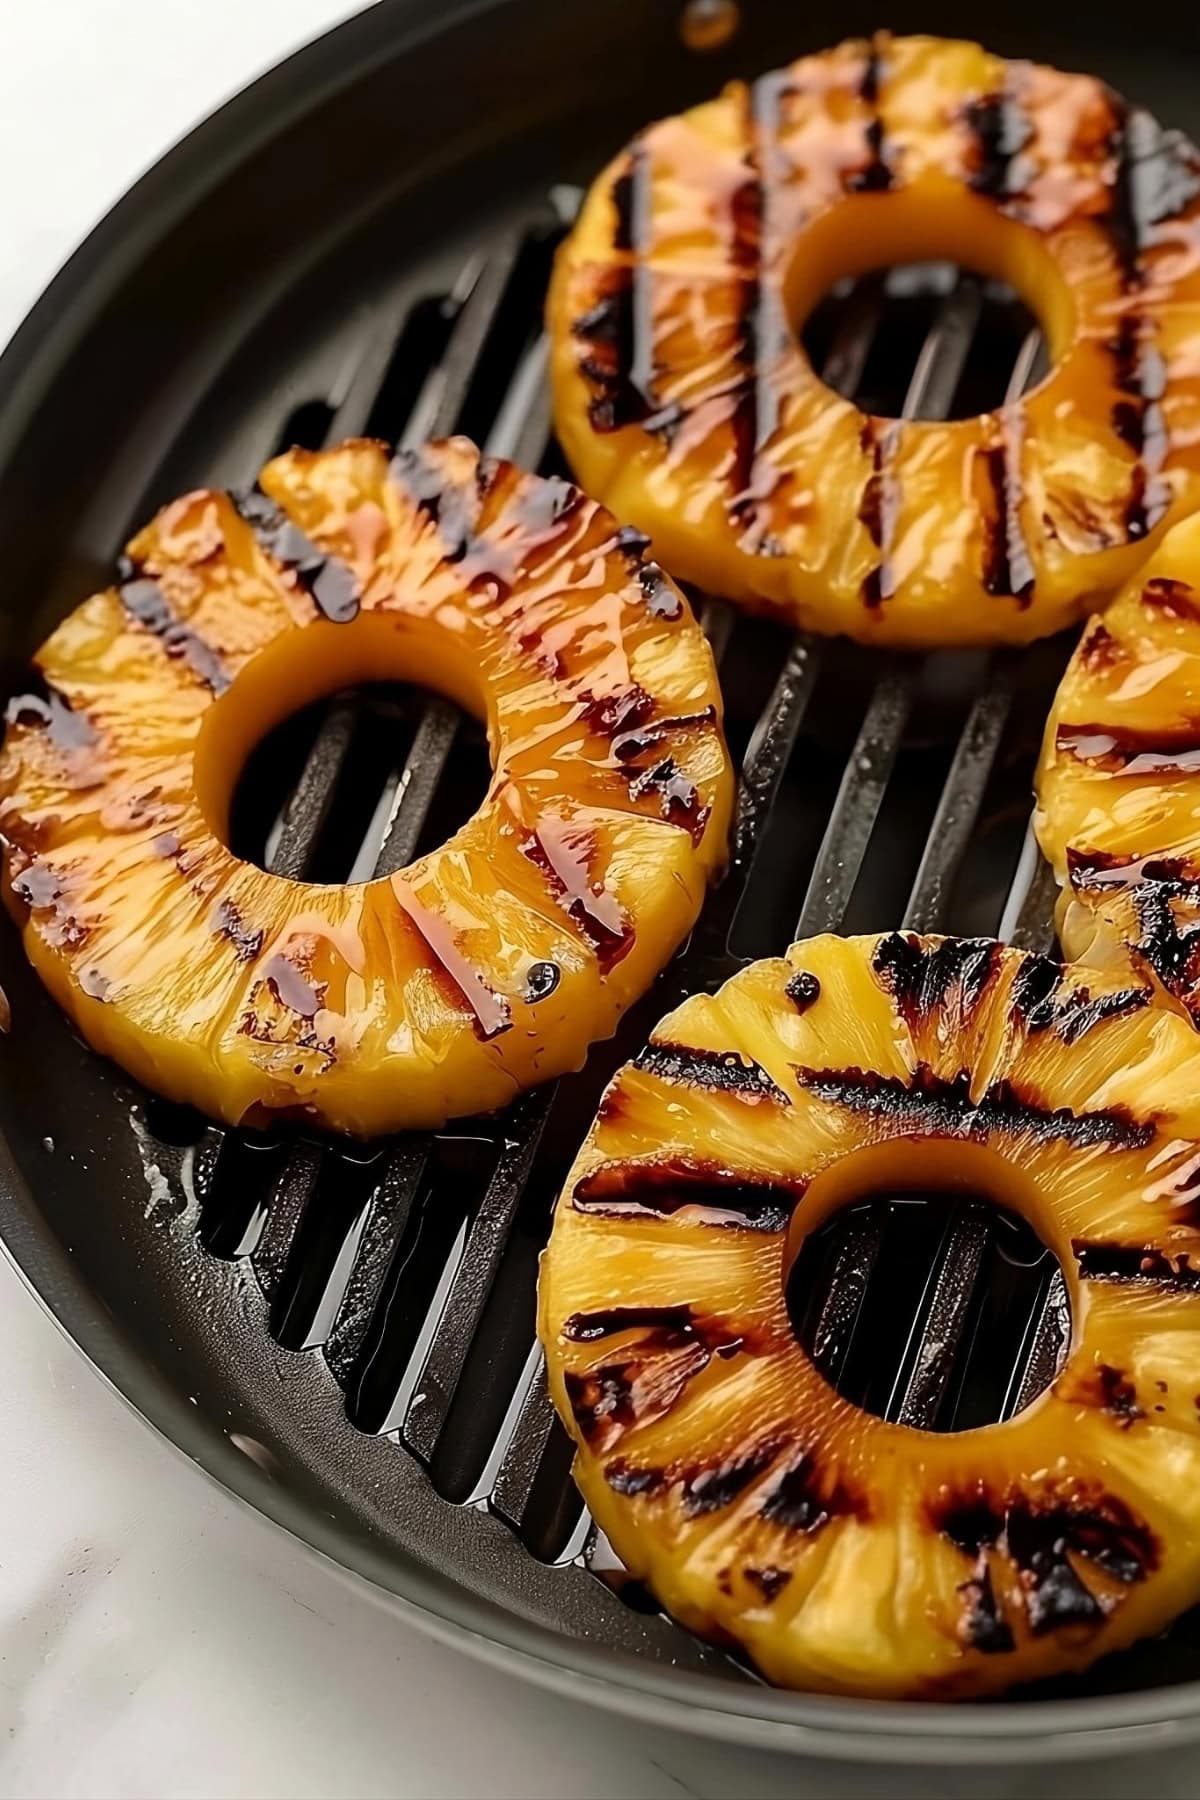 Pineapple rings grilled in a pan sitting on a white marble table.